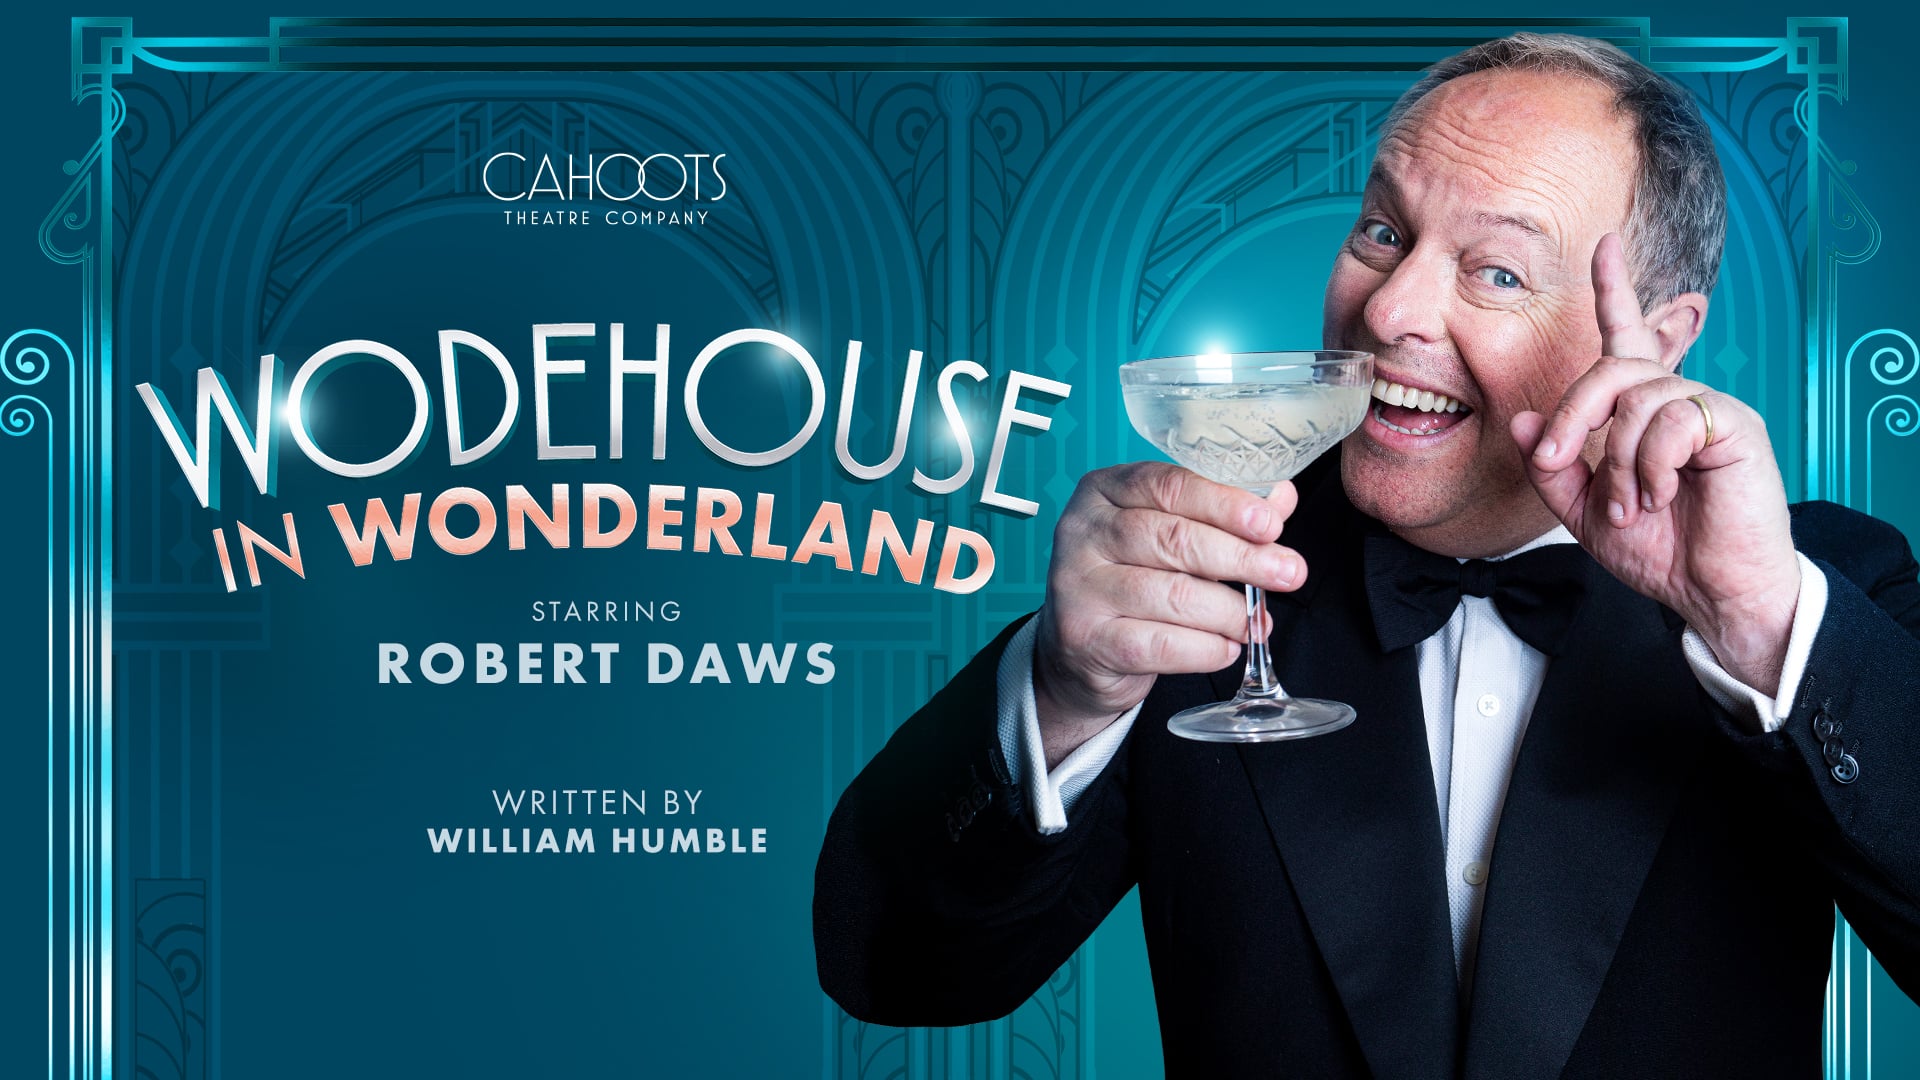 Wodehouse in Wonderland artwork: Light blue background with ornamental details. (Left) text reads: Cahoots Theatre Company. Wodehouse in Wonderland. Starring Robert Daws. Written by William Humble. (Right) actor Robert Daws, wearing a black tuxedo with bow tie, smiles while holding a martini drink in his left hand and wagging his right-hand finger.